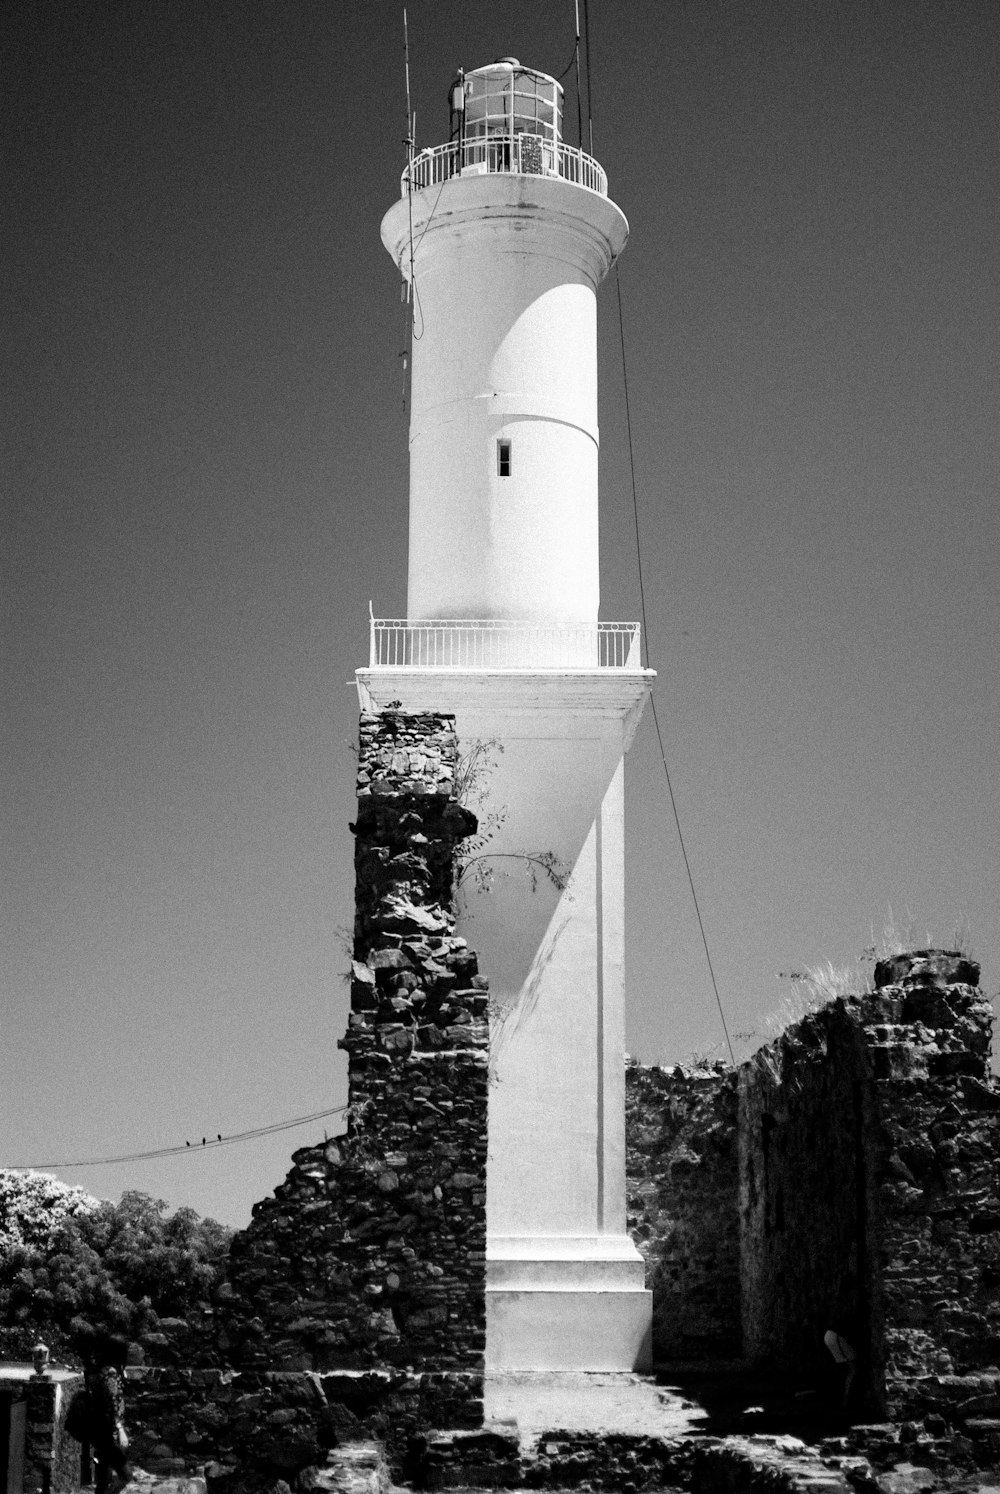 a white tower with a white top